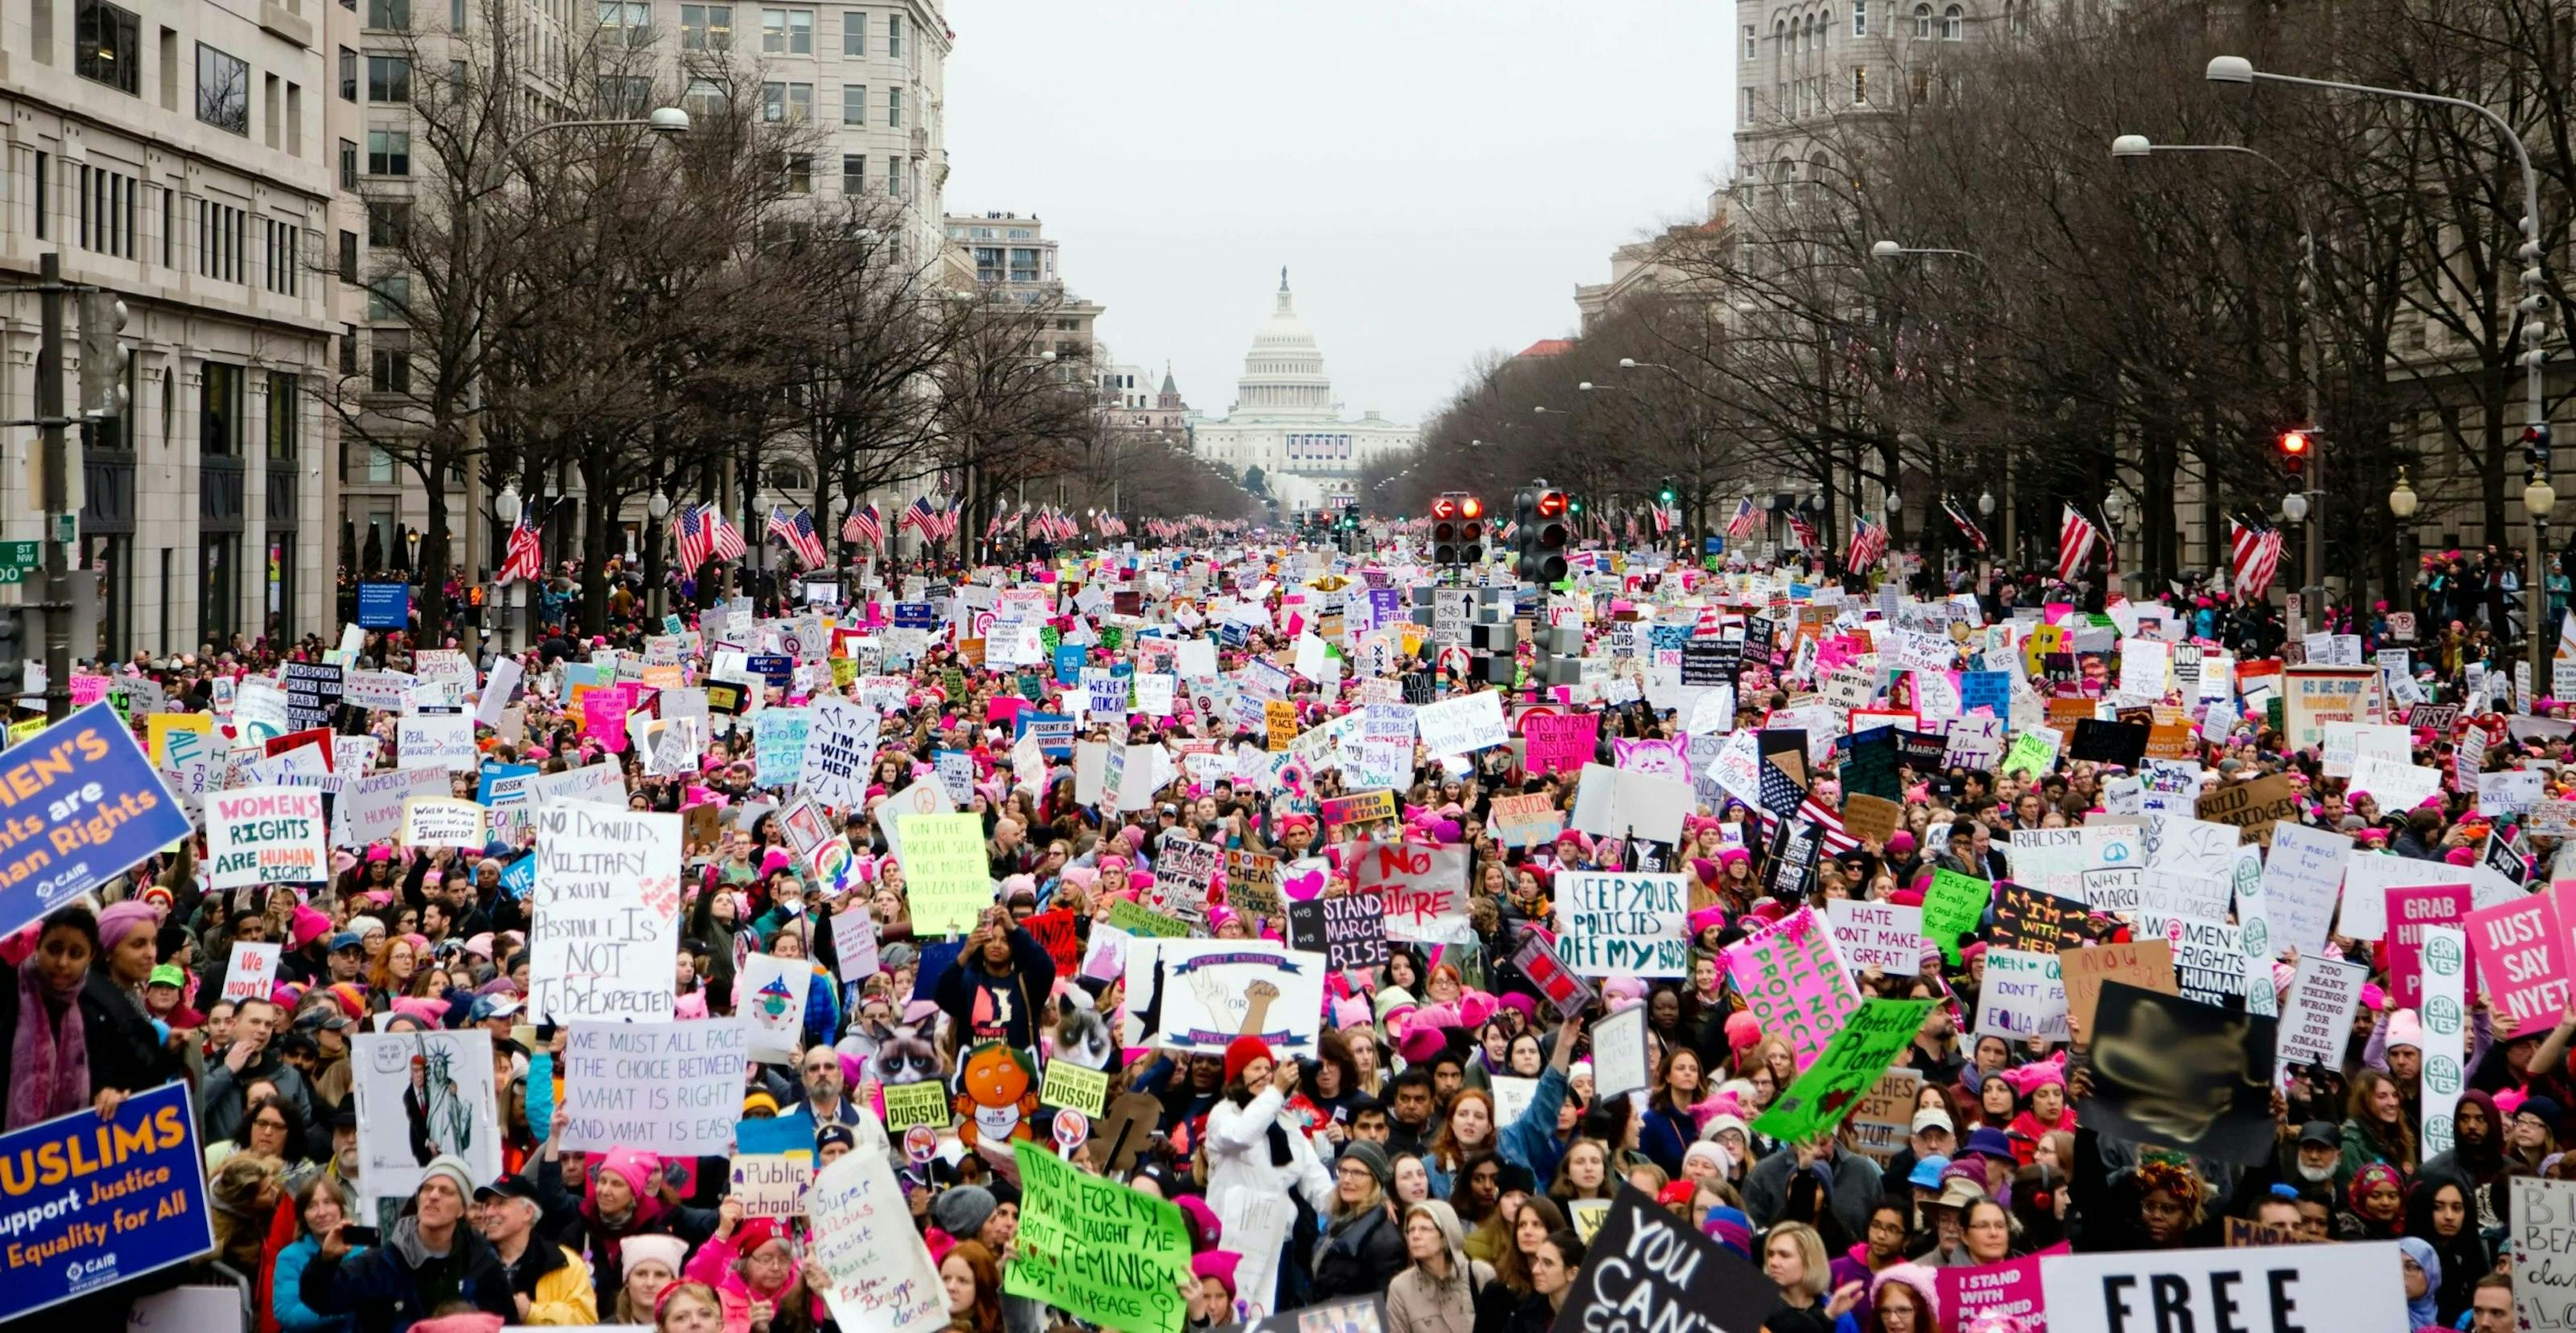 Women protesting for abortion rights